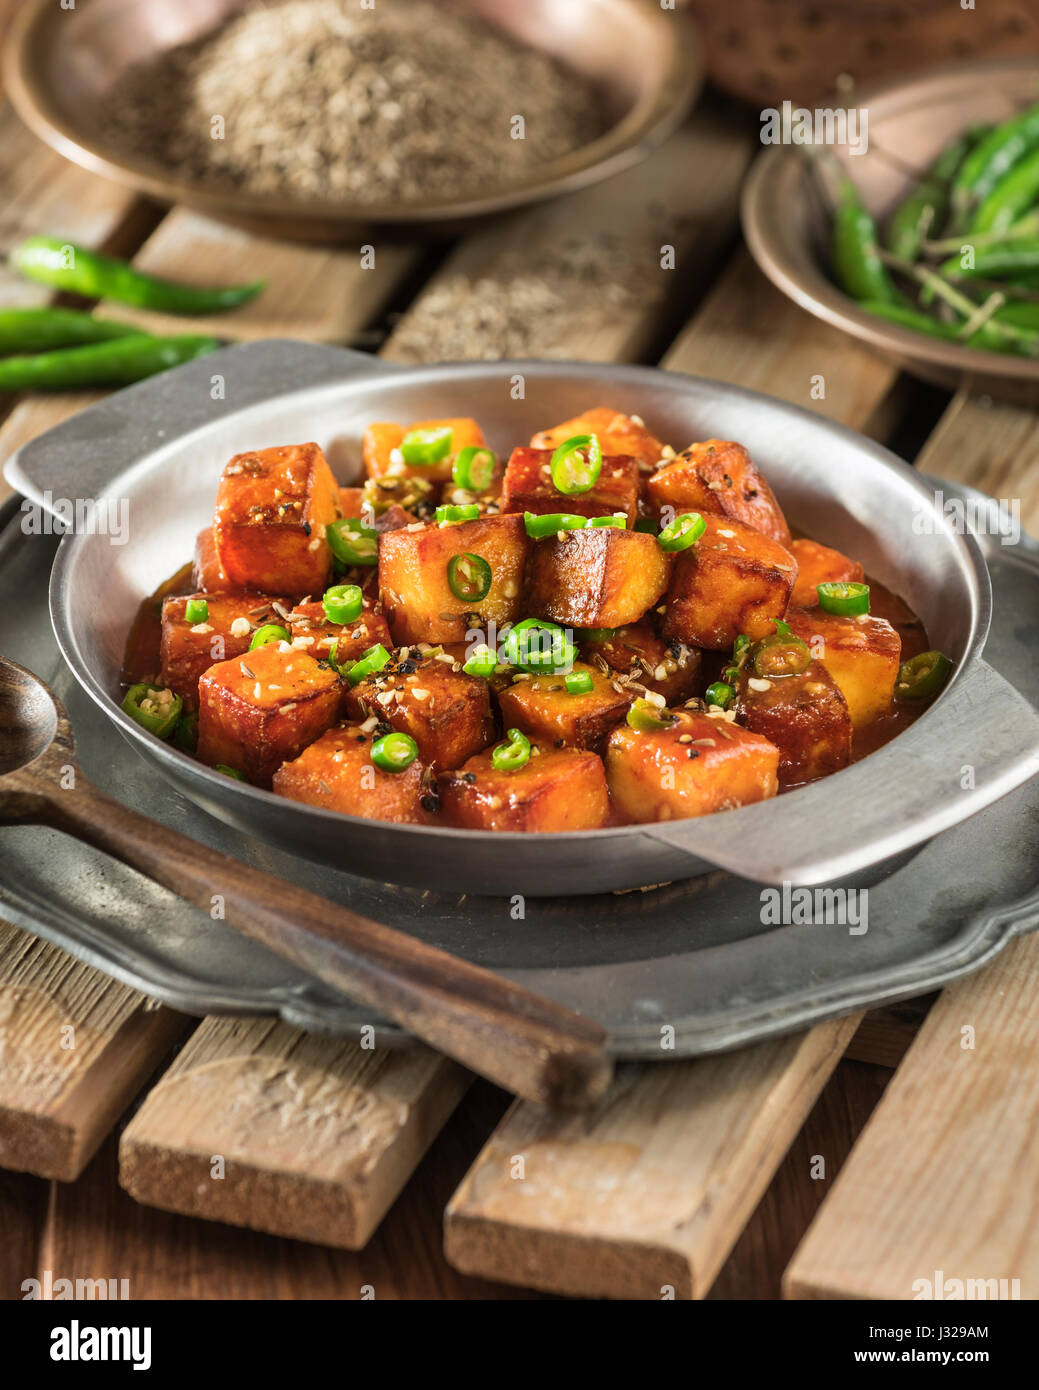 Chilli paneer. Spicy Indo chinese starter. India Food Stock Photo